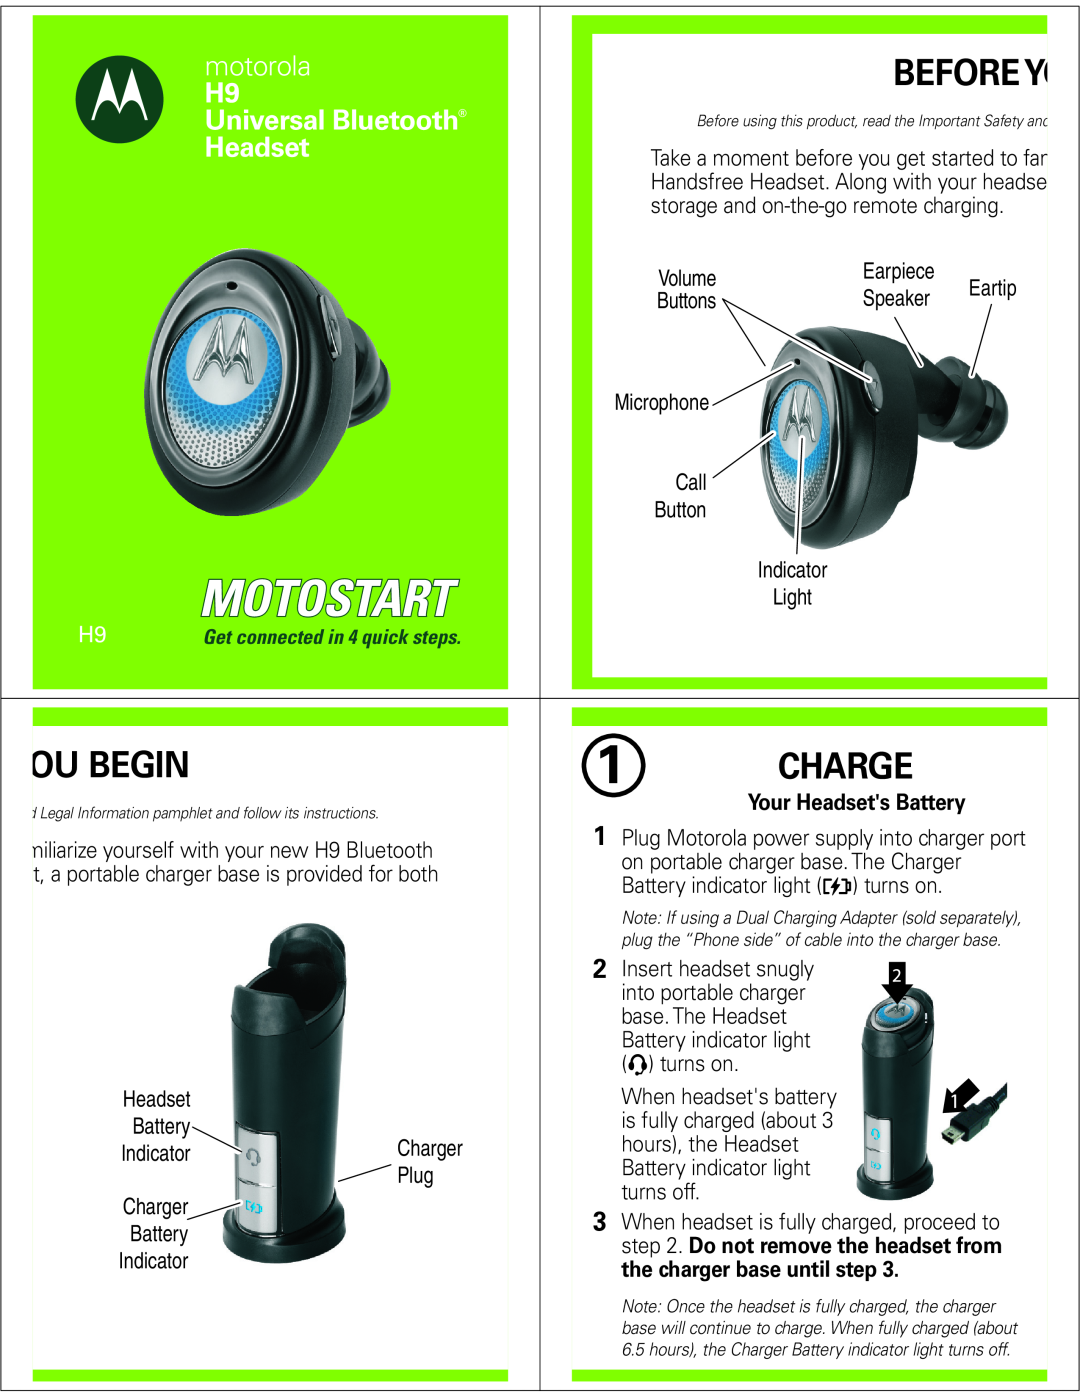 Motorola H9 manual Ou Begin, Charge, Before Yo, Your Headsets Battery, Do not remove the headset from, motorola 